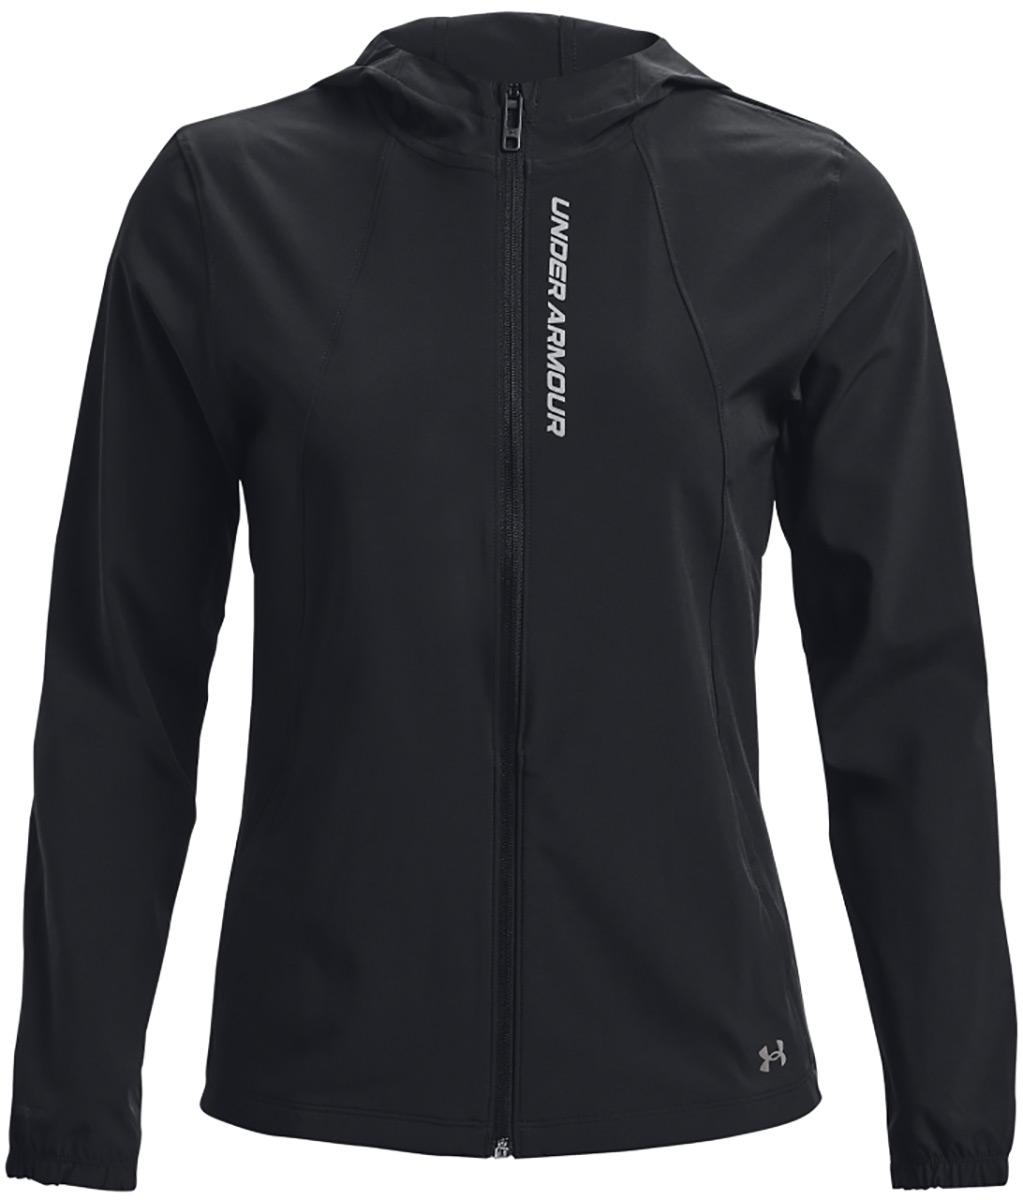 Under Armour Womens Outrun The Storm Jacket - Black / Reflective / Reflective